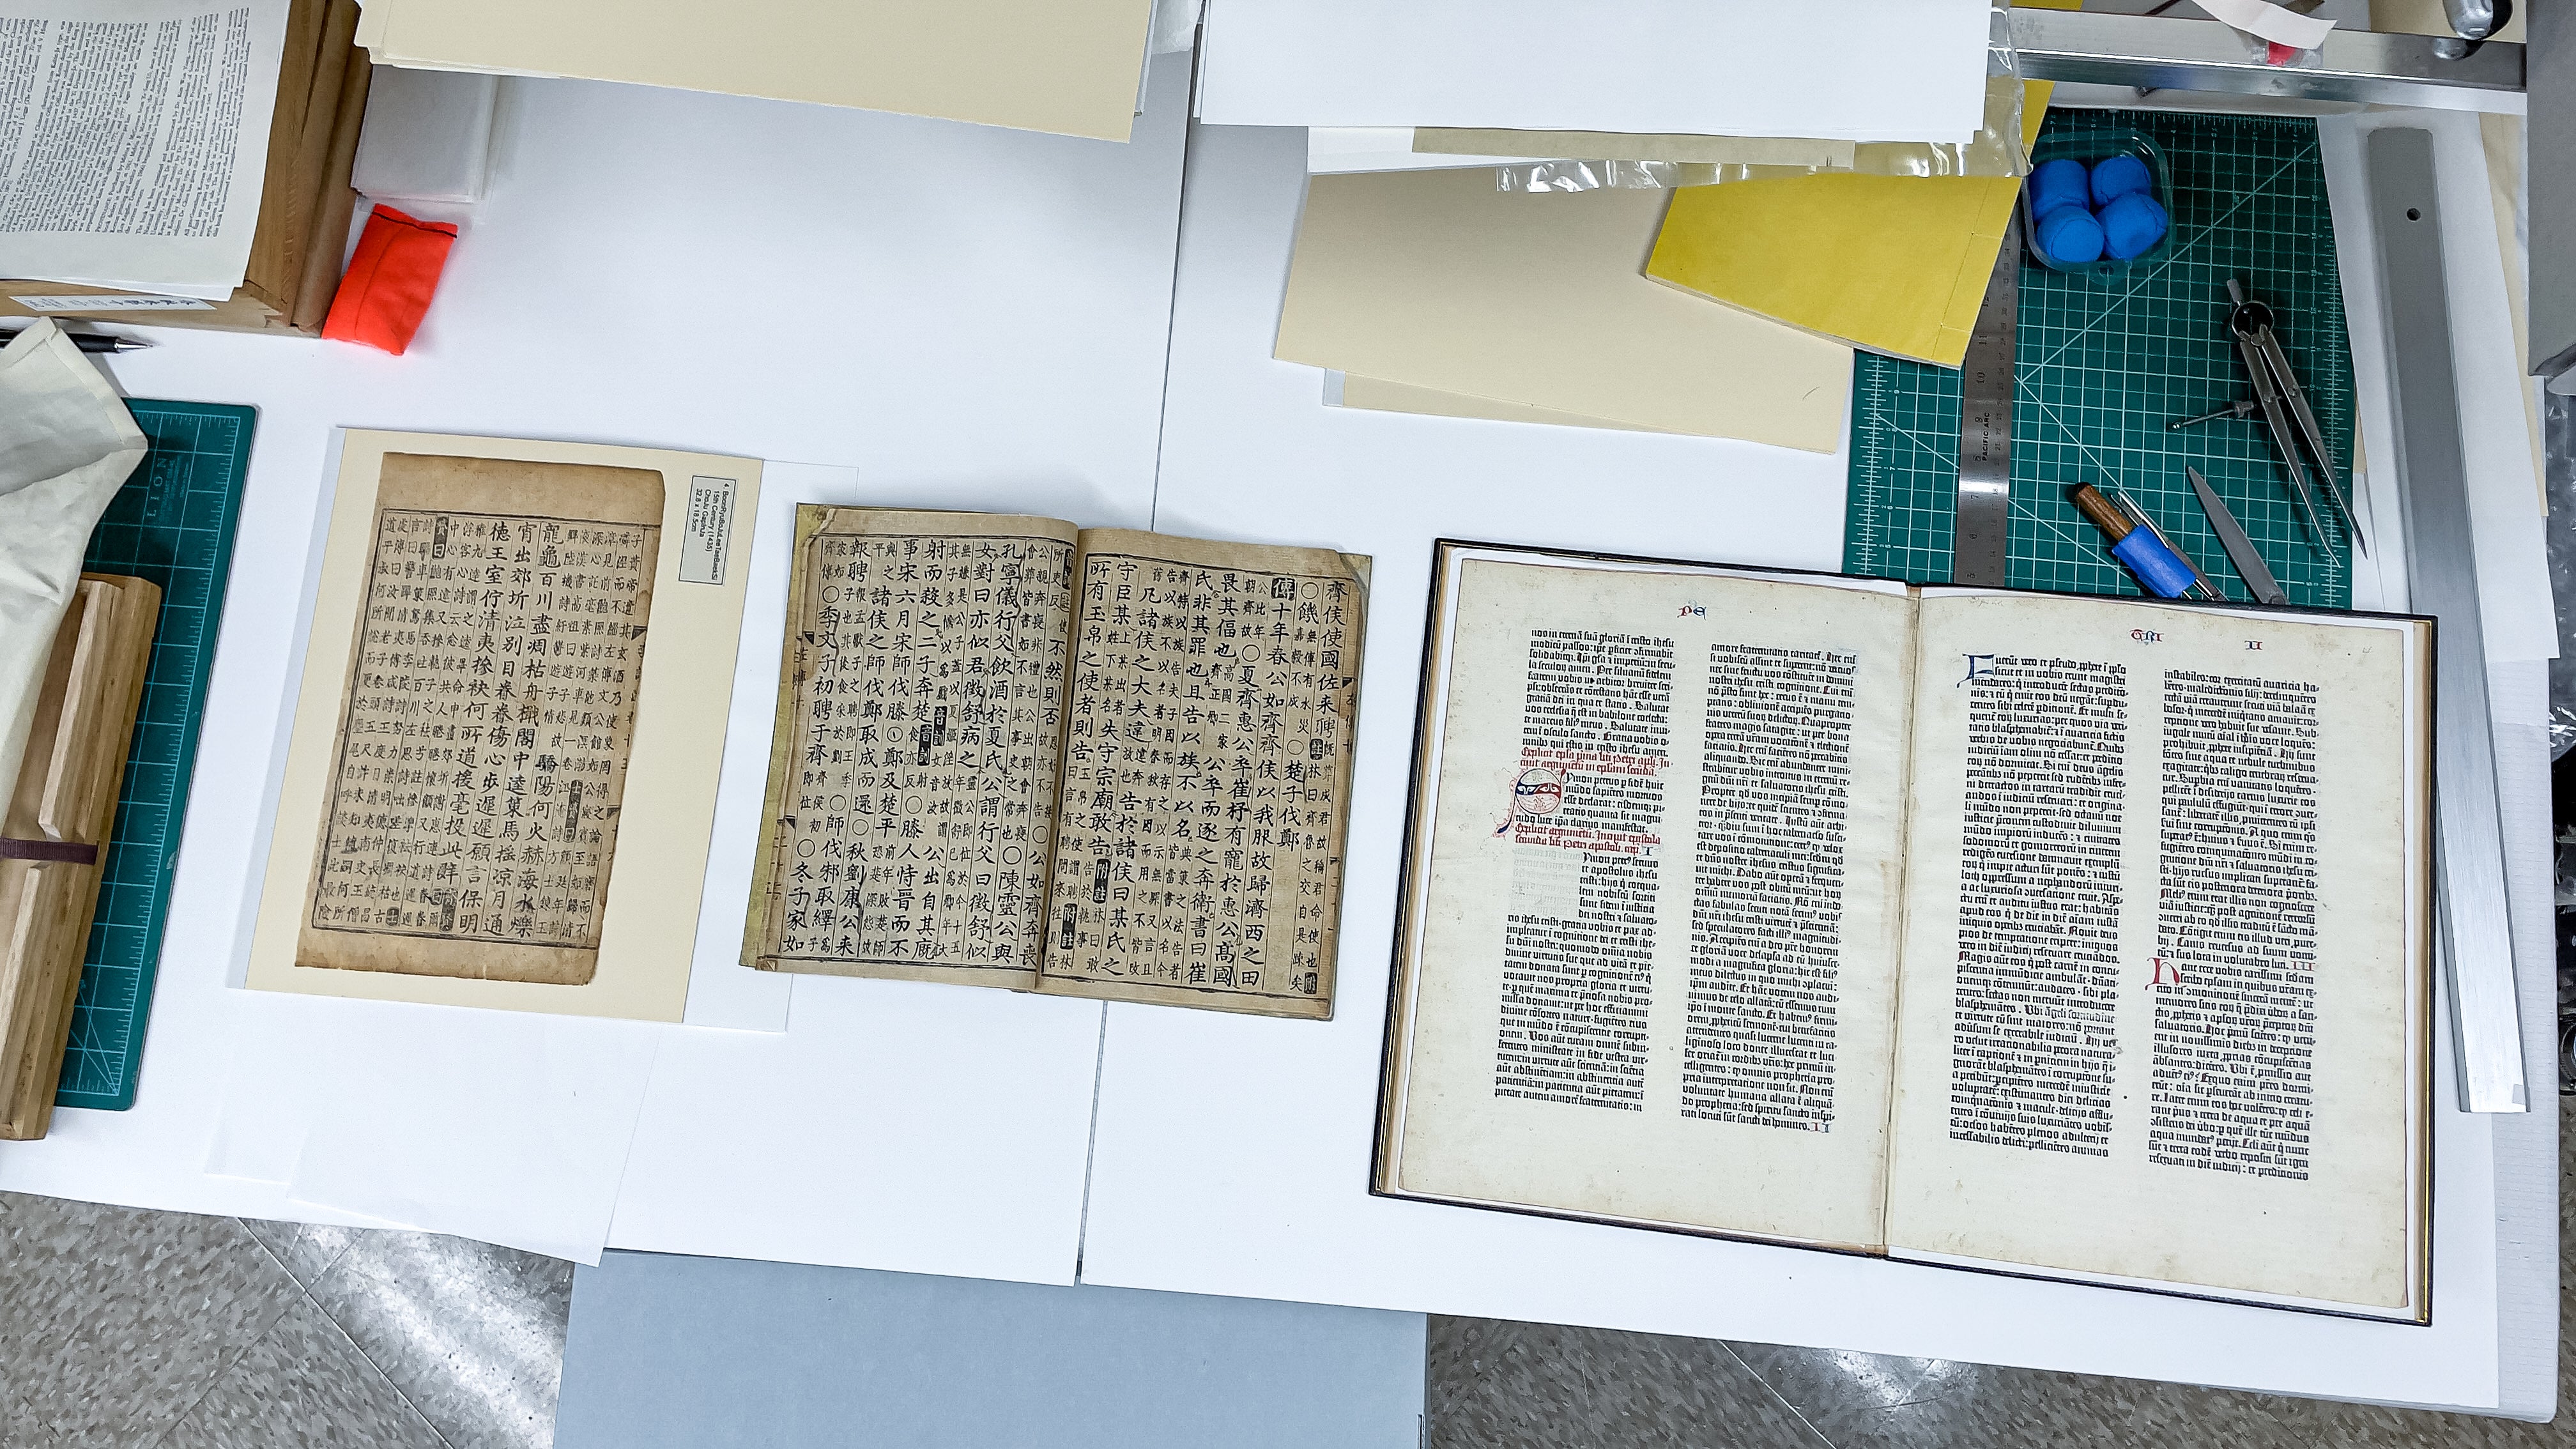 Two Korean documents and leaves of the Gutenberg Bible side-by-side at SLAC. (Photo: Jacqueline Ramseyer Orrell/SLAC National Accelerator Laboratory)